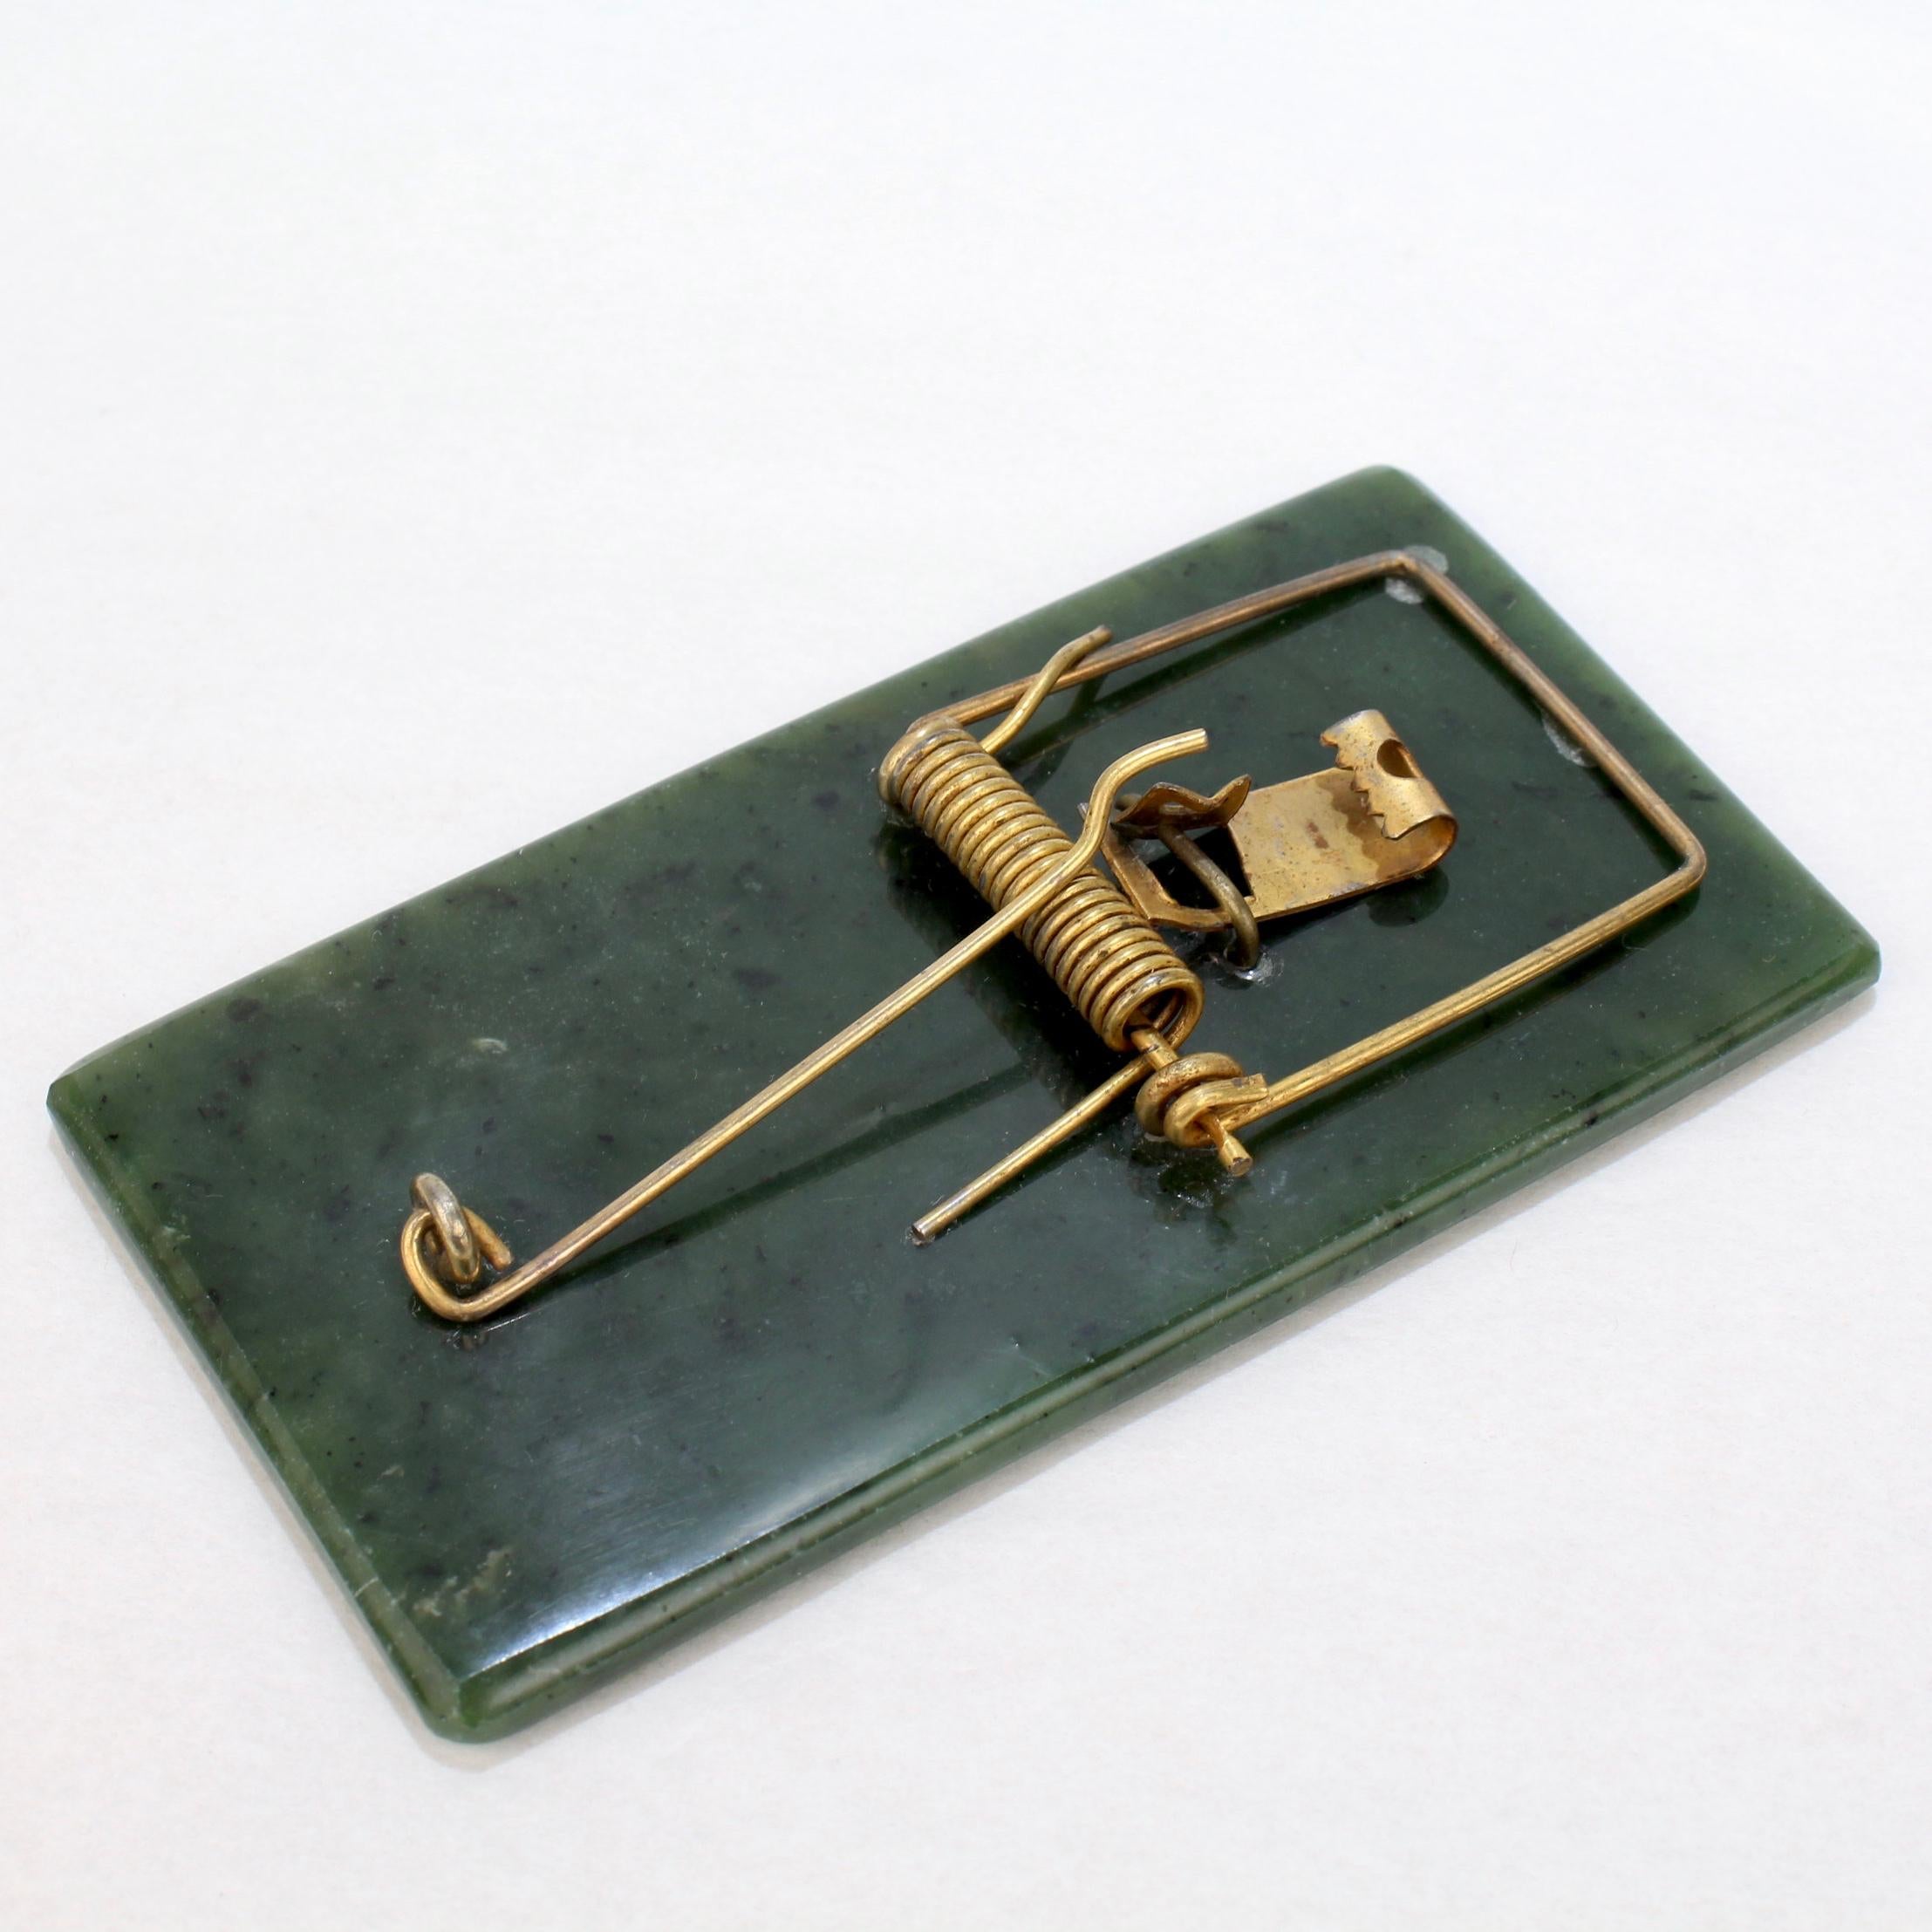 Uncut Whimsical Jade Gemstone and Gold-Plated Mouse Trap Sculpture or Desk Paper Clip